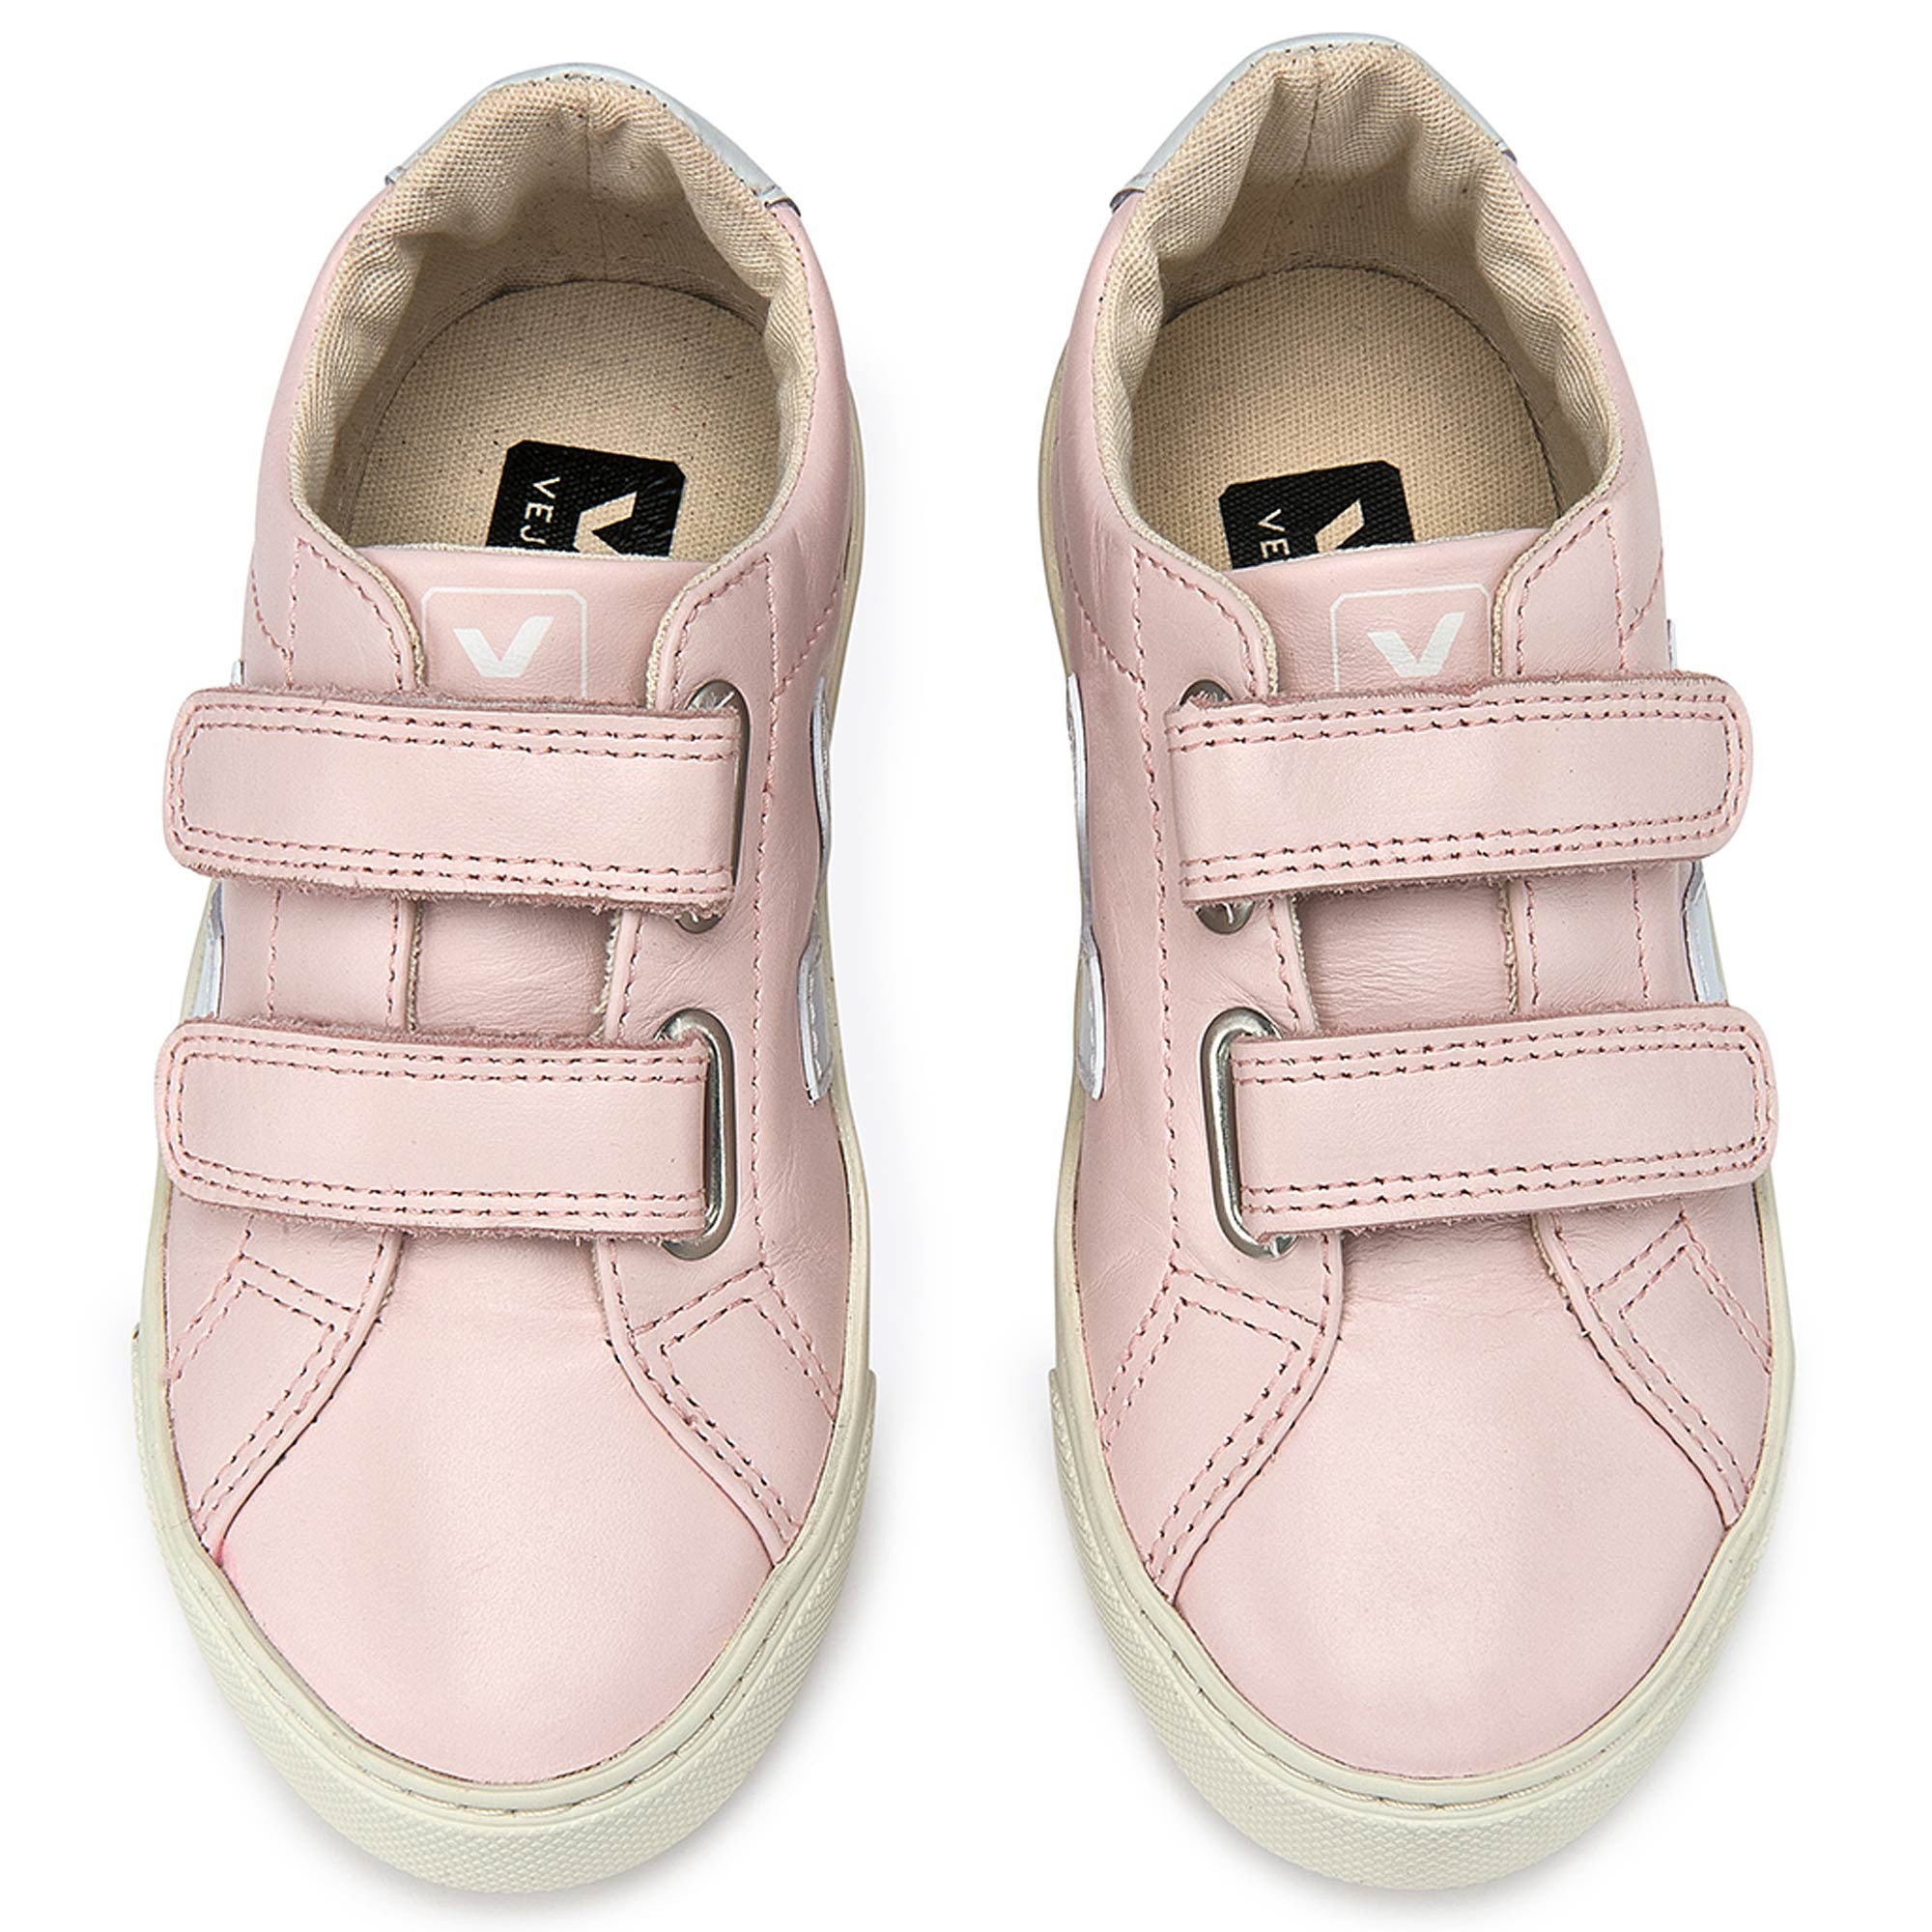 Girls Pink Leather Velcro Shoes - CÉMAROSE | Children's Fashion Store - 1